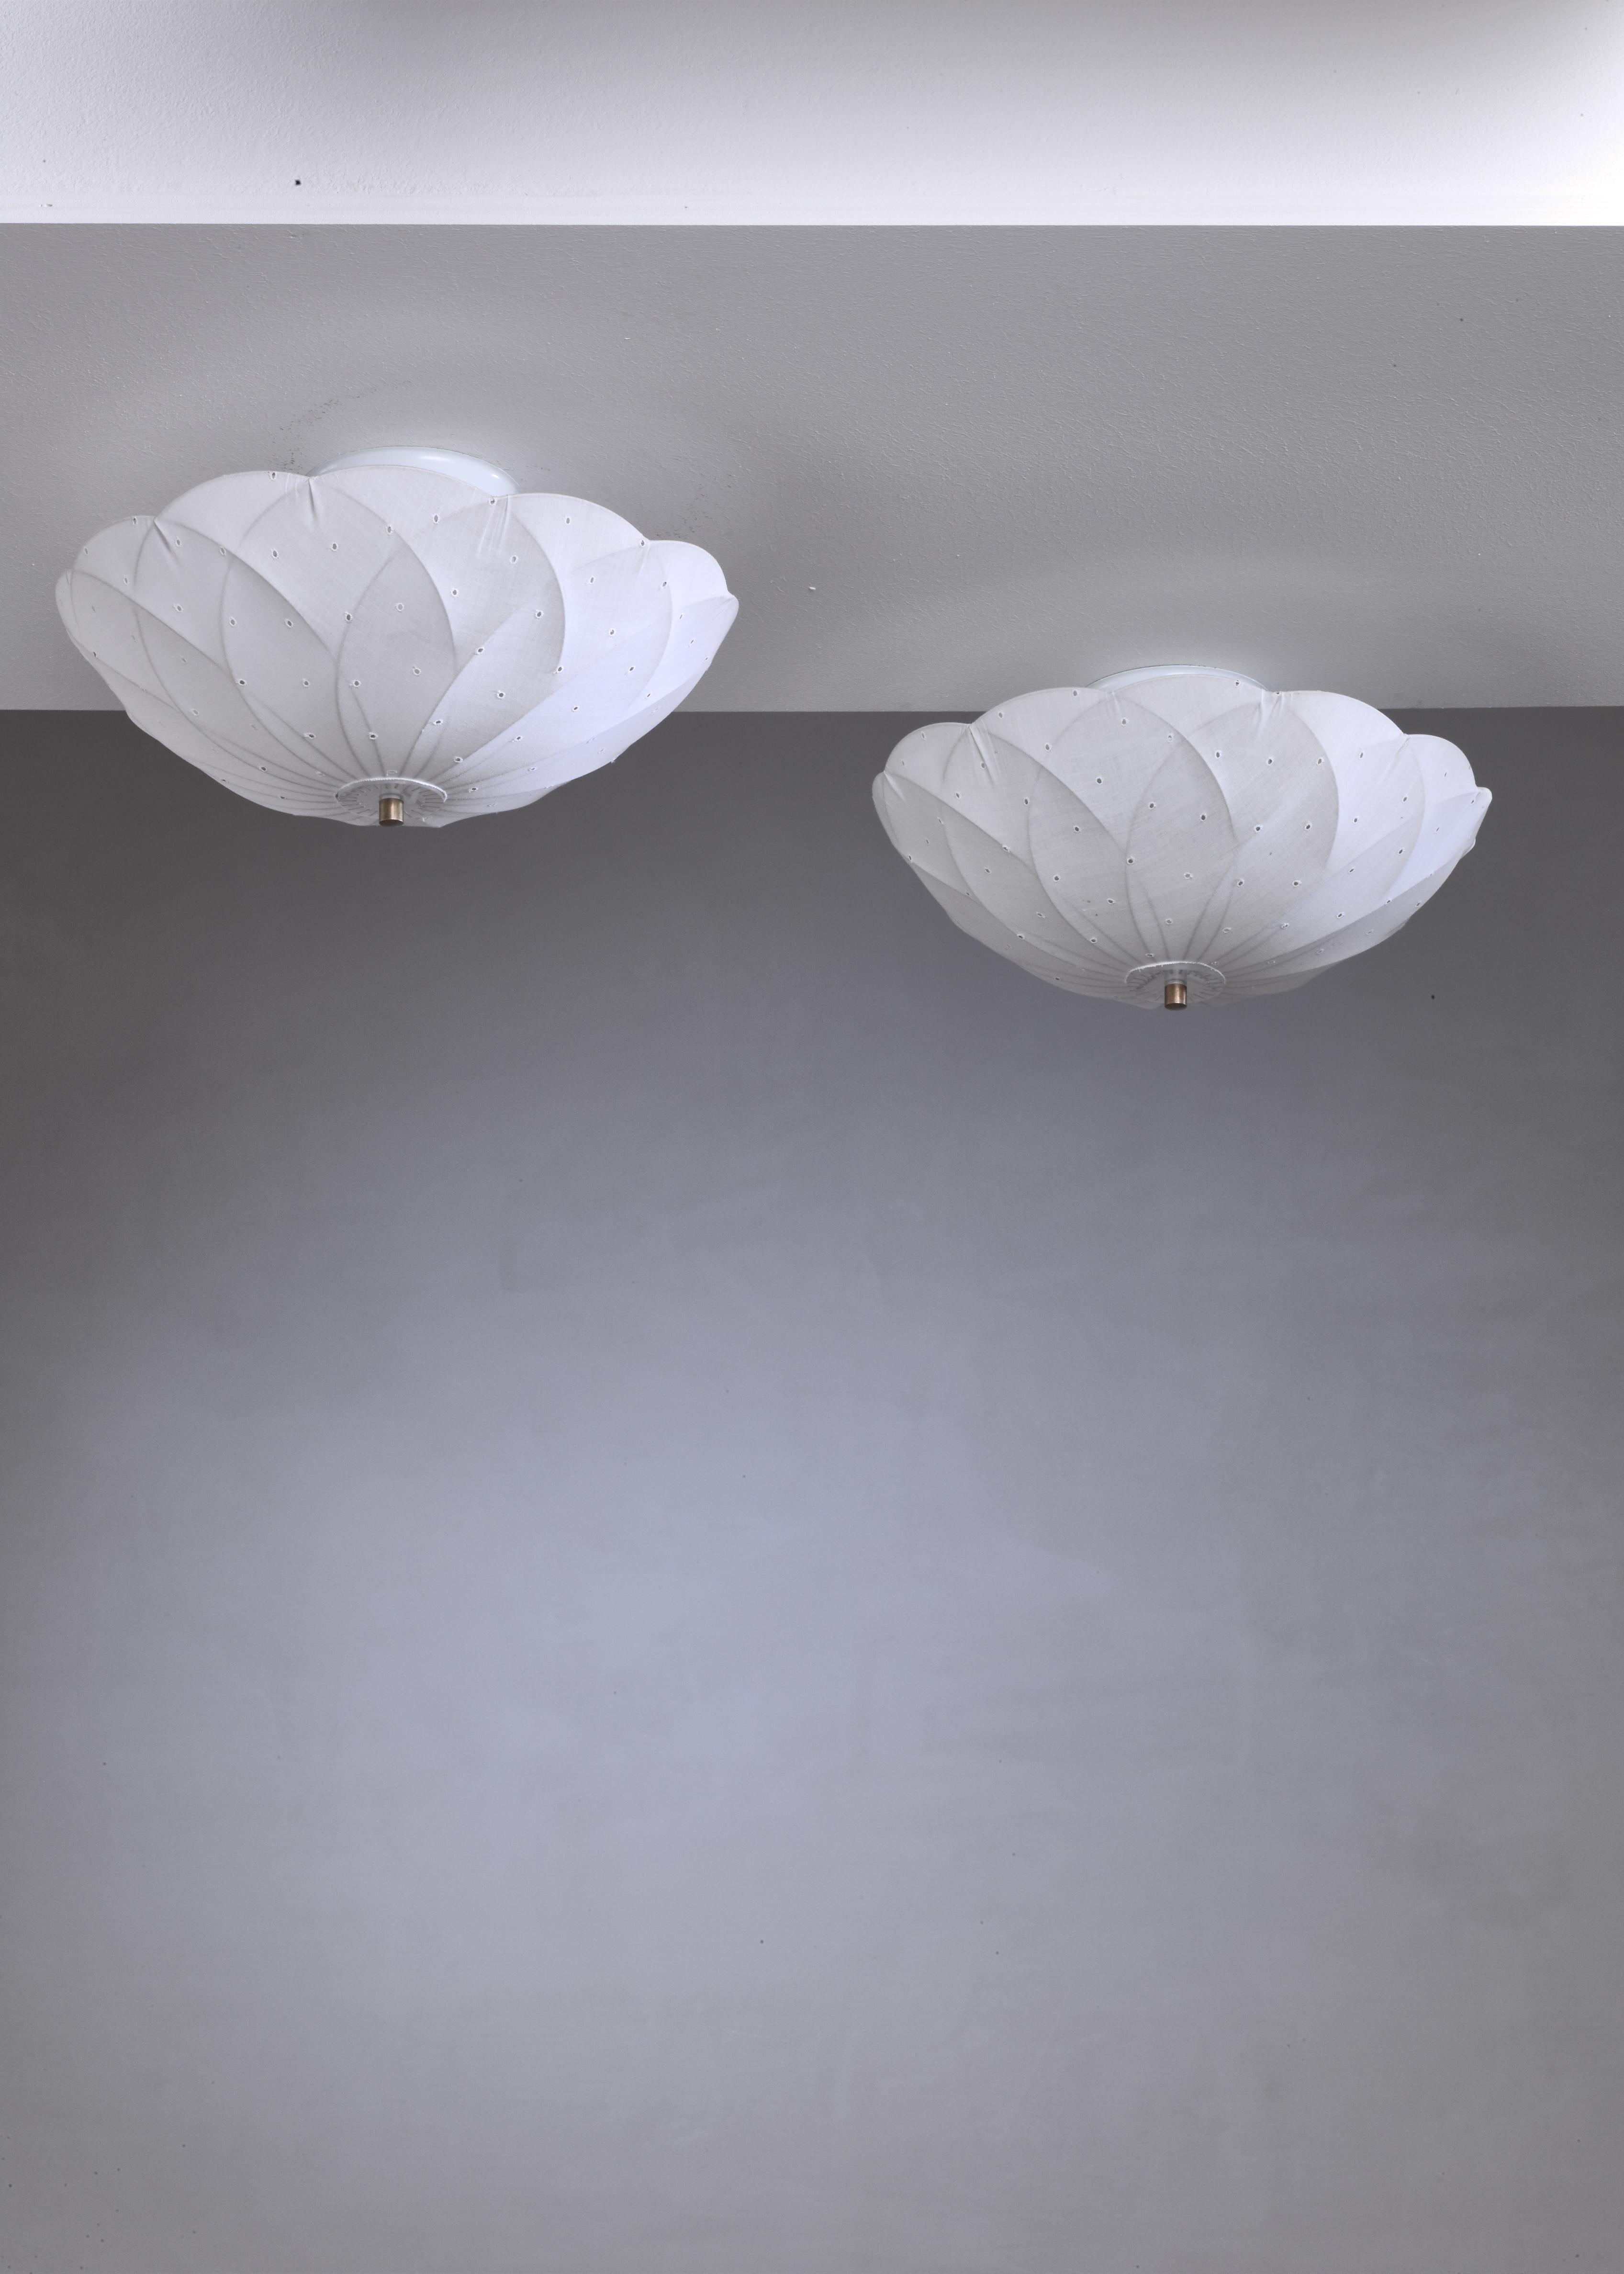 A 'Pia' flush mount ceiling lamp designed by Swedish architect Tore Ahlsén for Gärsnäs. The lamp has a white fabric shade on a metal wire frame.

We also have four pendants available by Tore Ahlsen in the same modern bohemian style.

Price is per